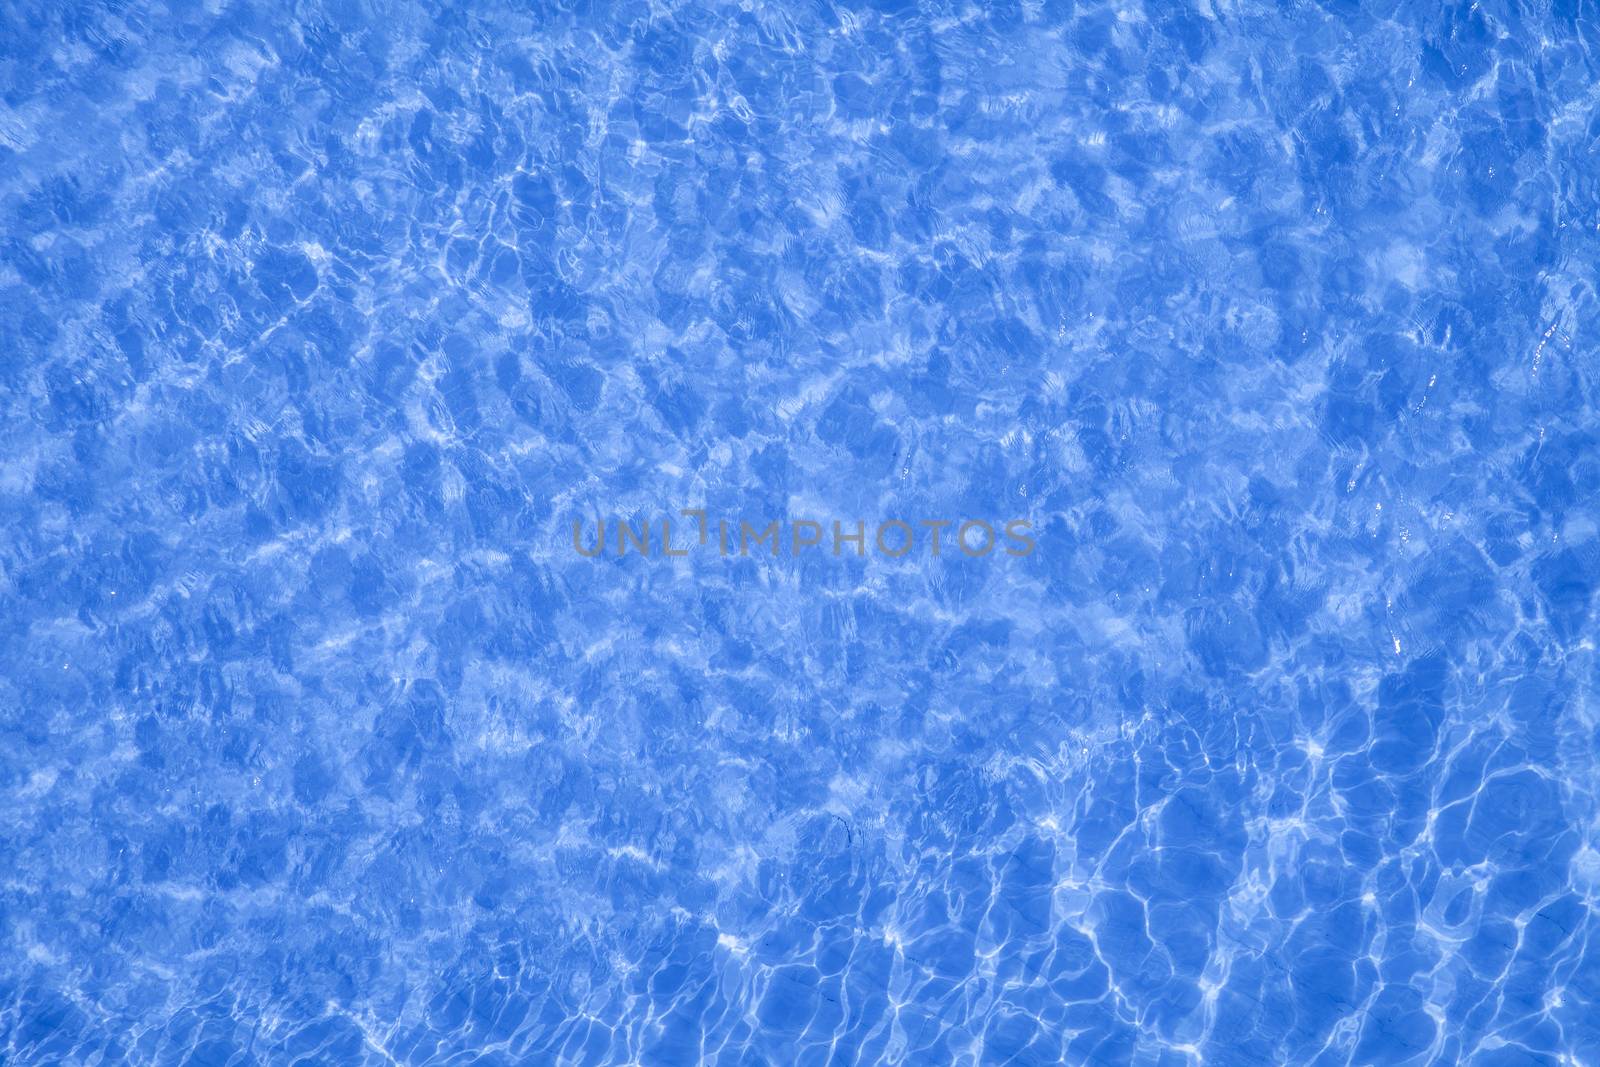 Blue Pool Water Texture From a High Balcony